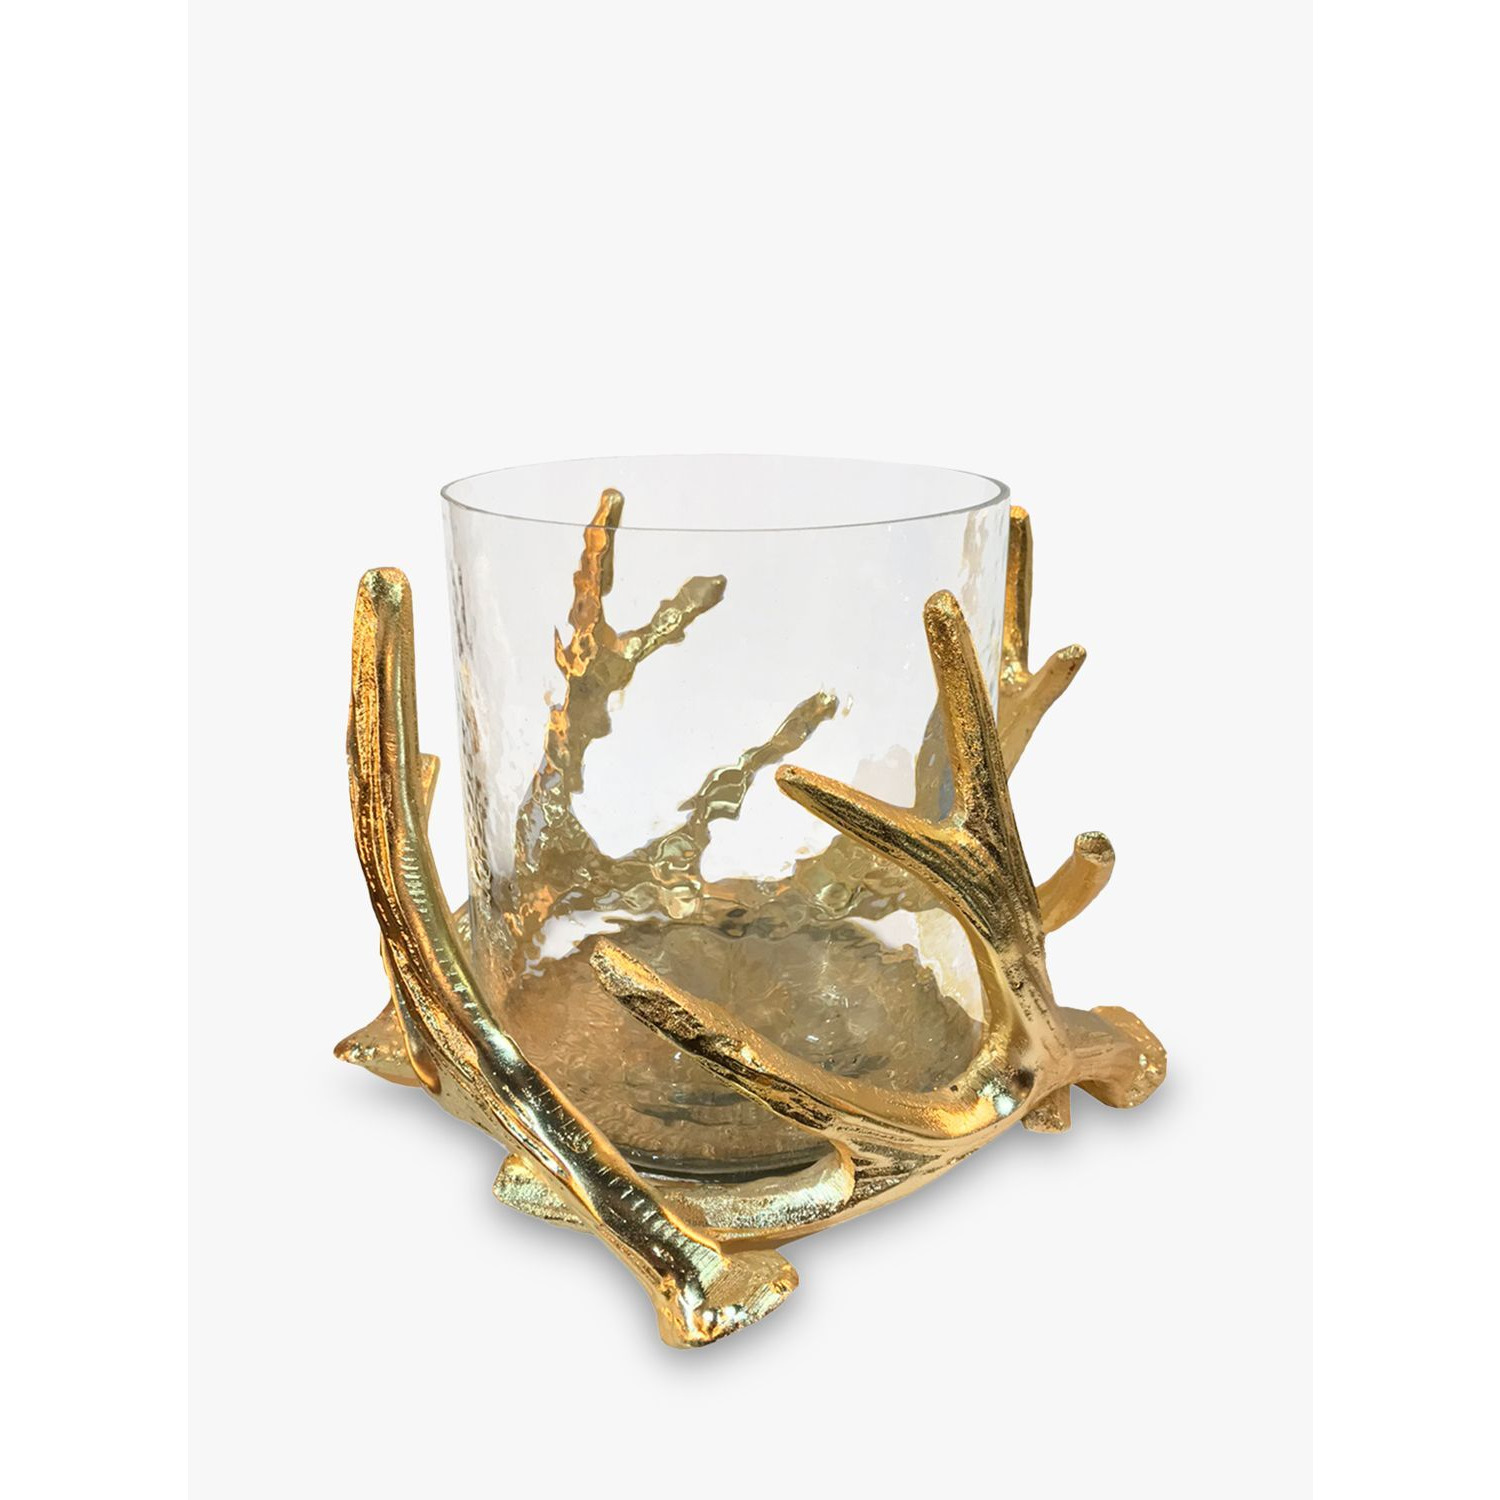 Culinary Concepts Antler Medium Hurricane Candle Holder, Gold - image 1